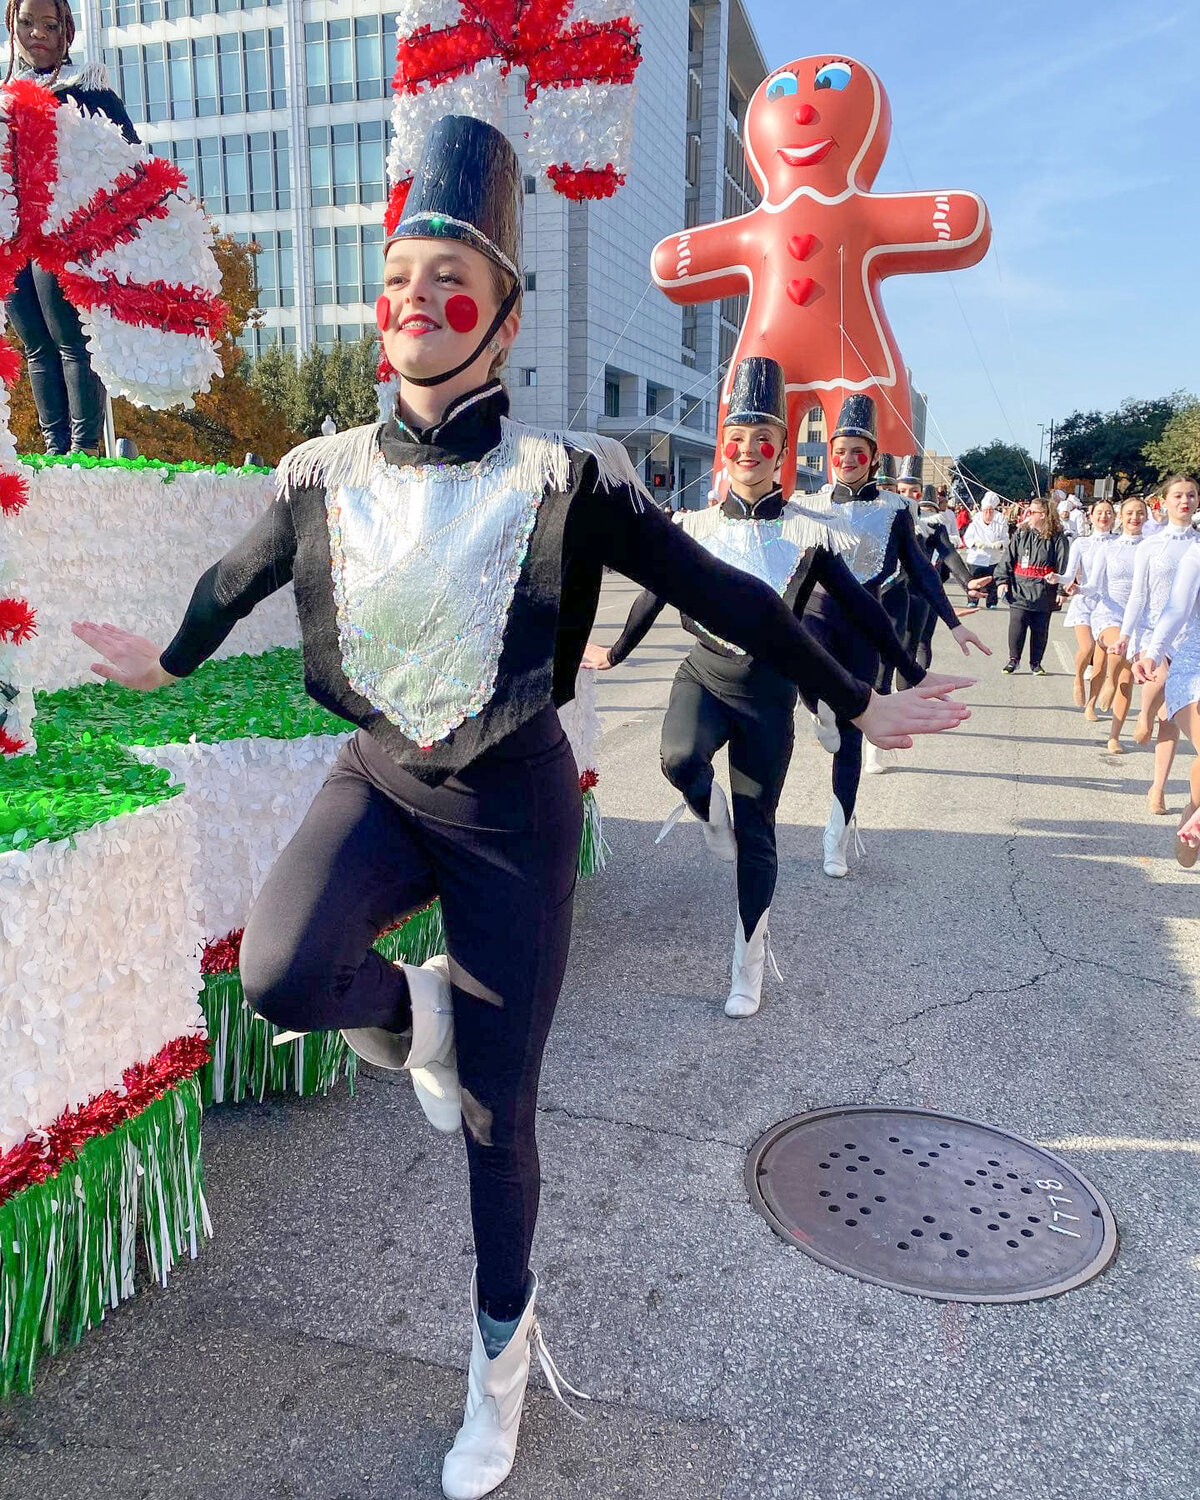 Their first year performing in the Dallas Holiday Parade, the Stowaways performed as candy cane girls, and last year, they were toy soldiers.